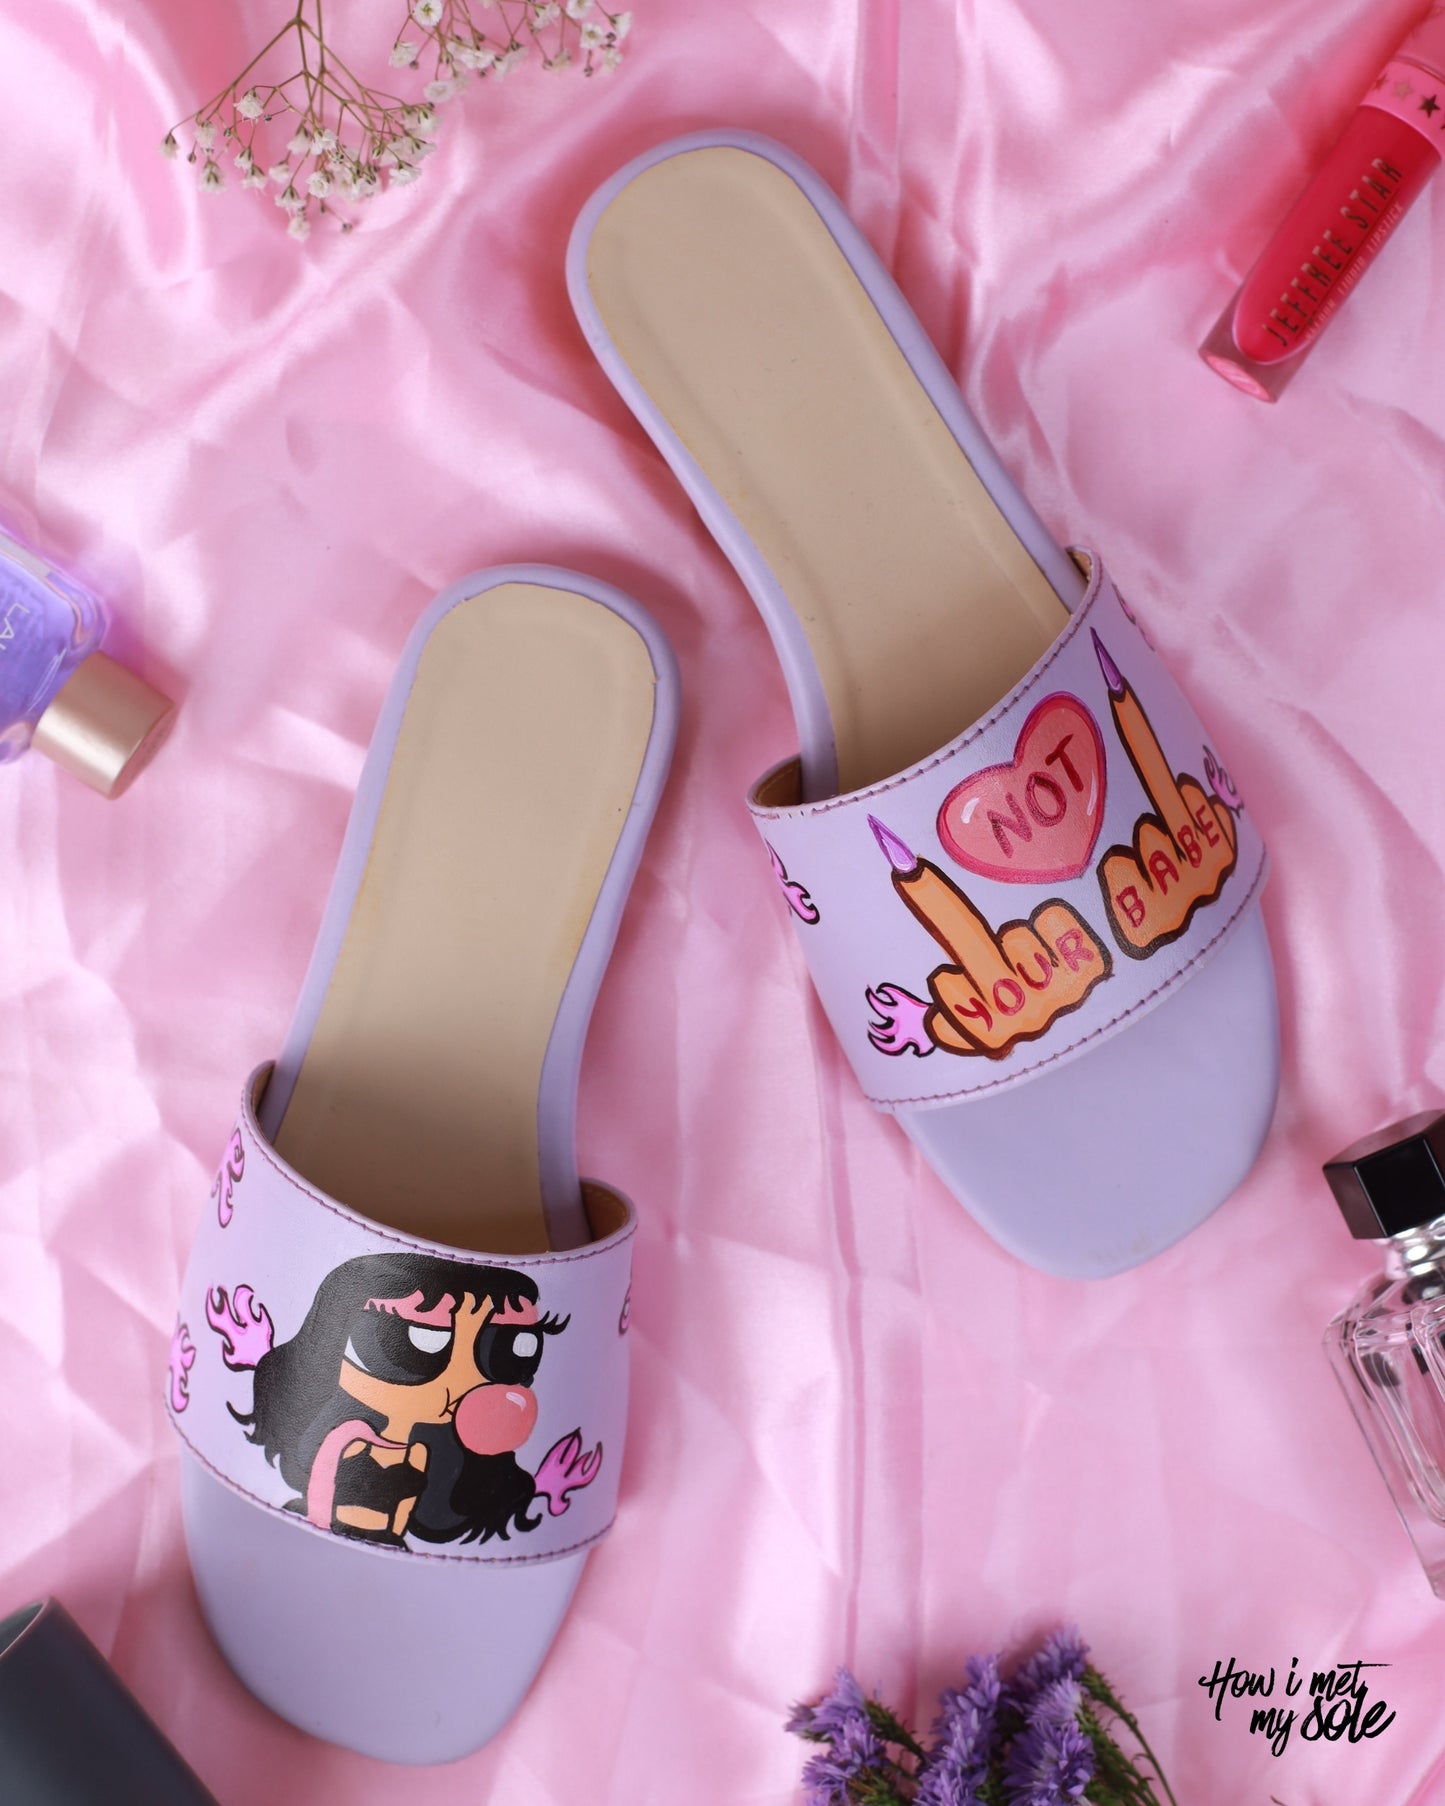 Hand-Painted Not Your Babe Slides - Top 